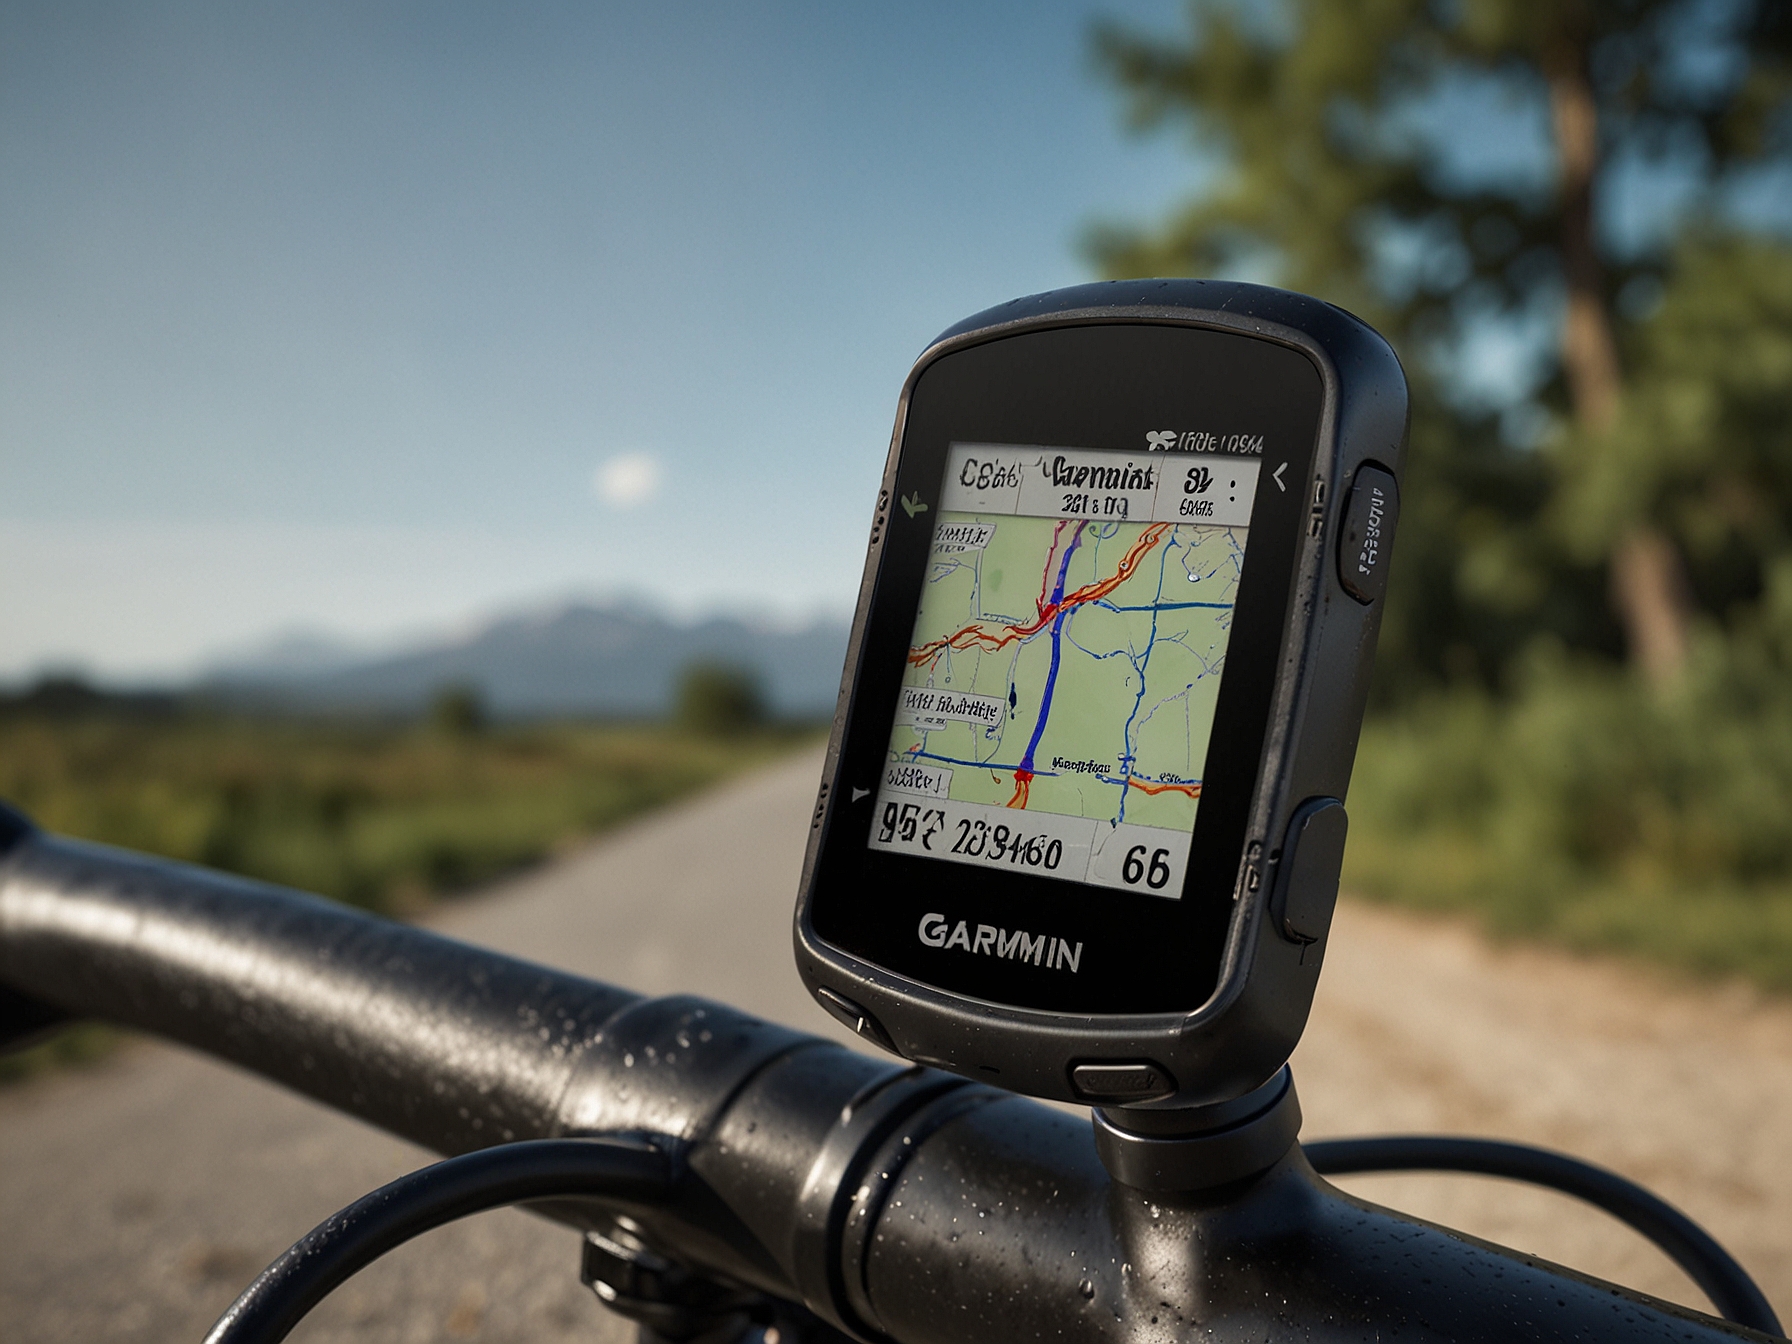 An illustration showing the Garmin Edge 1050 mounted on a bicycle handlebar, displaying a high-resolution touch screen with active performance metrics and navigation features.